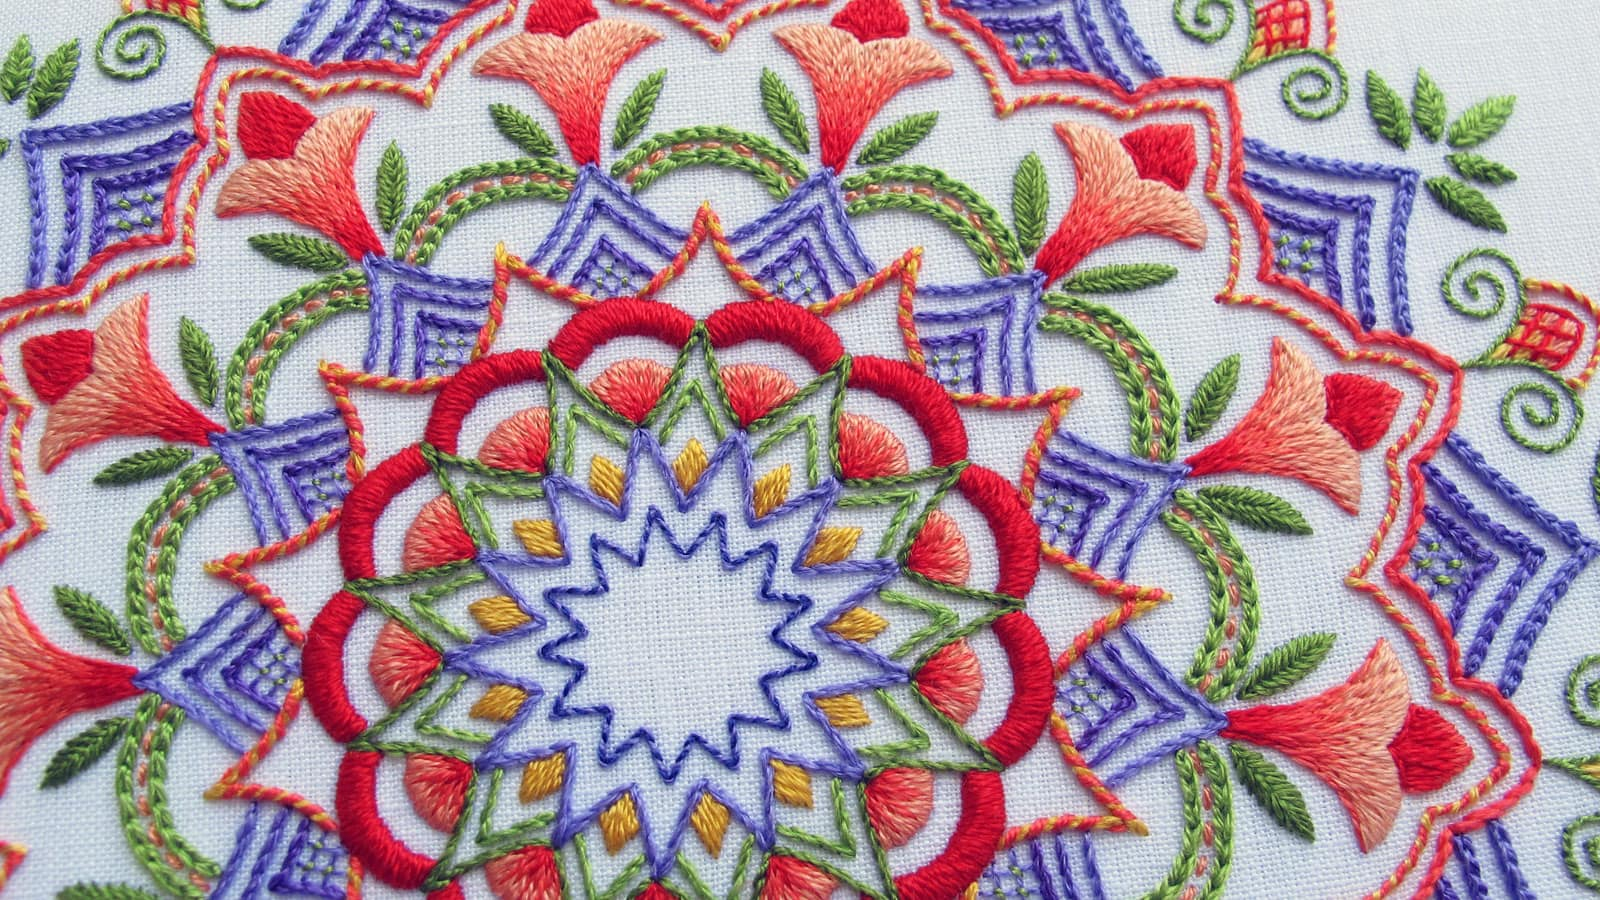 Hardanger Embroidery Patterns Online Free Needlenthread Tips Tricks And Great Resources For Hand Embroidery